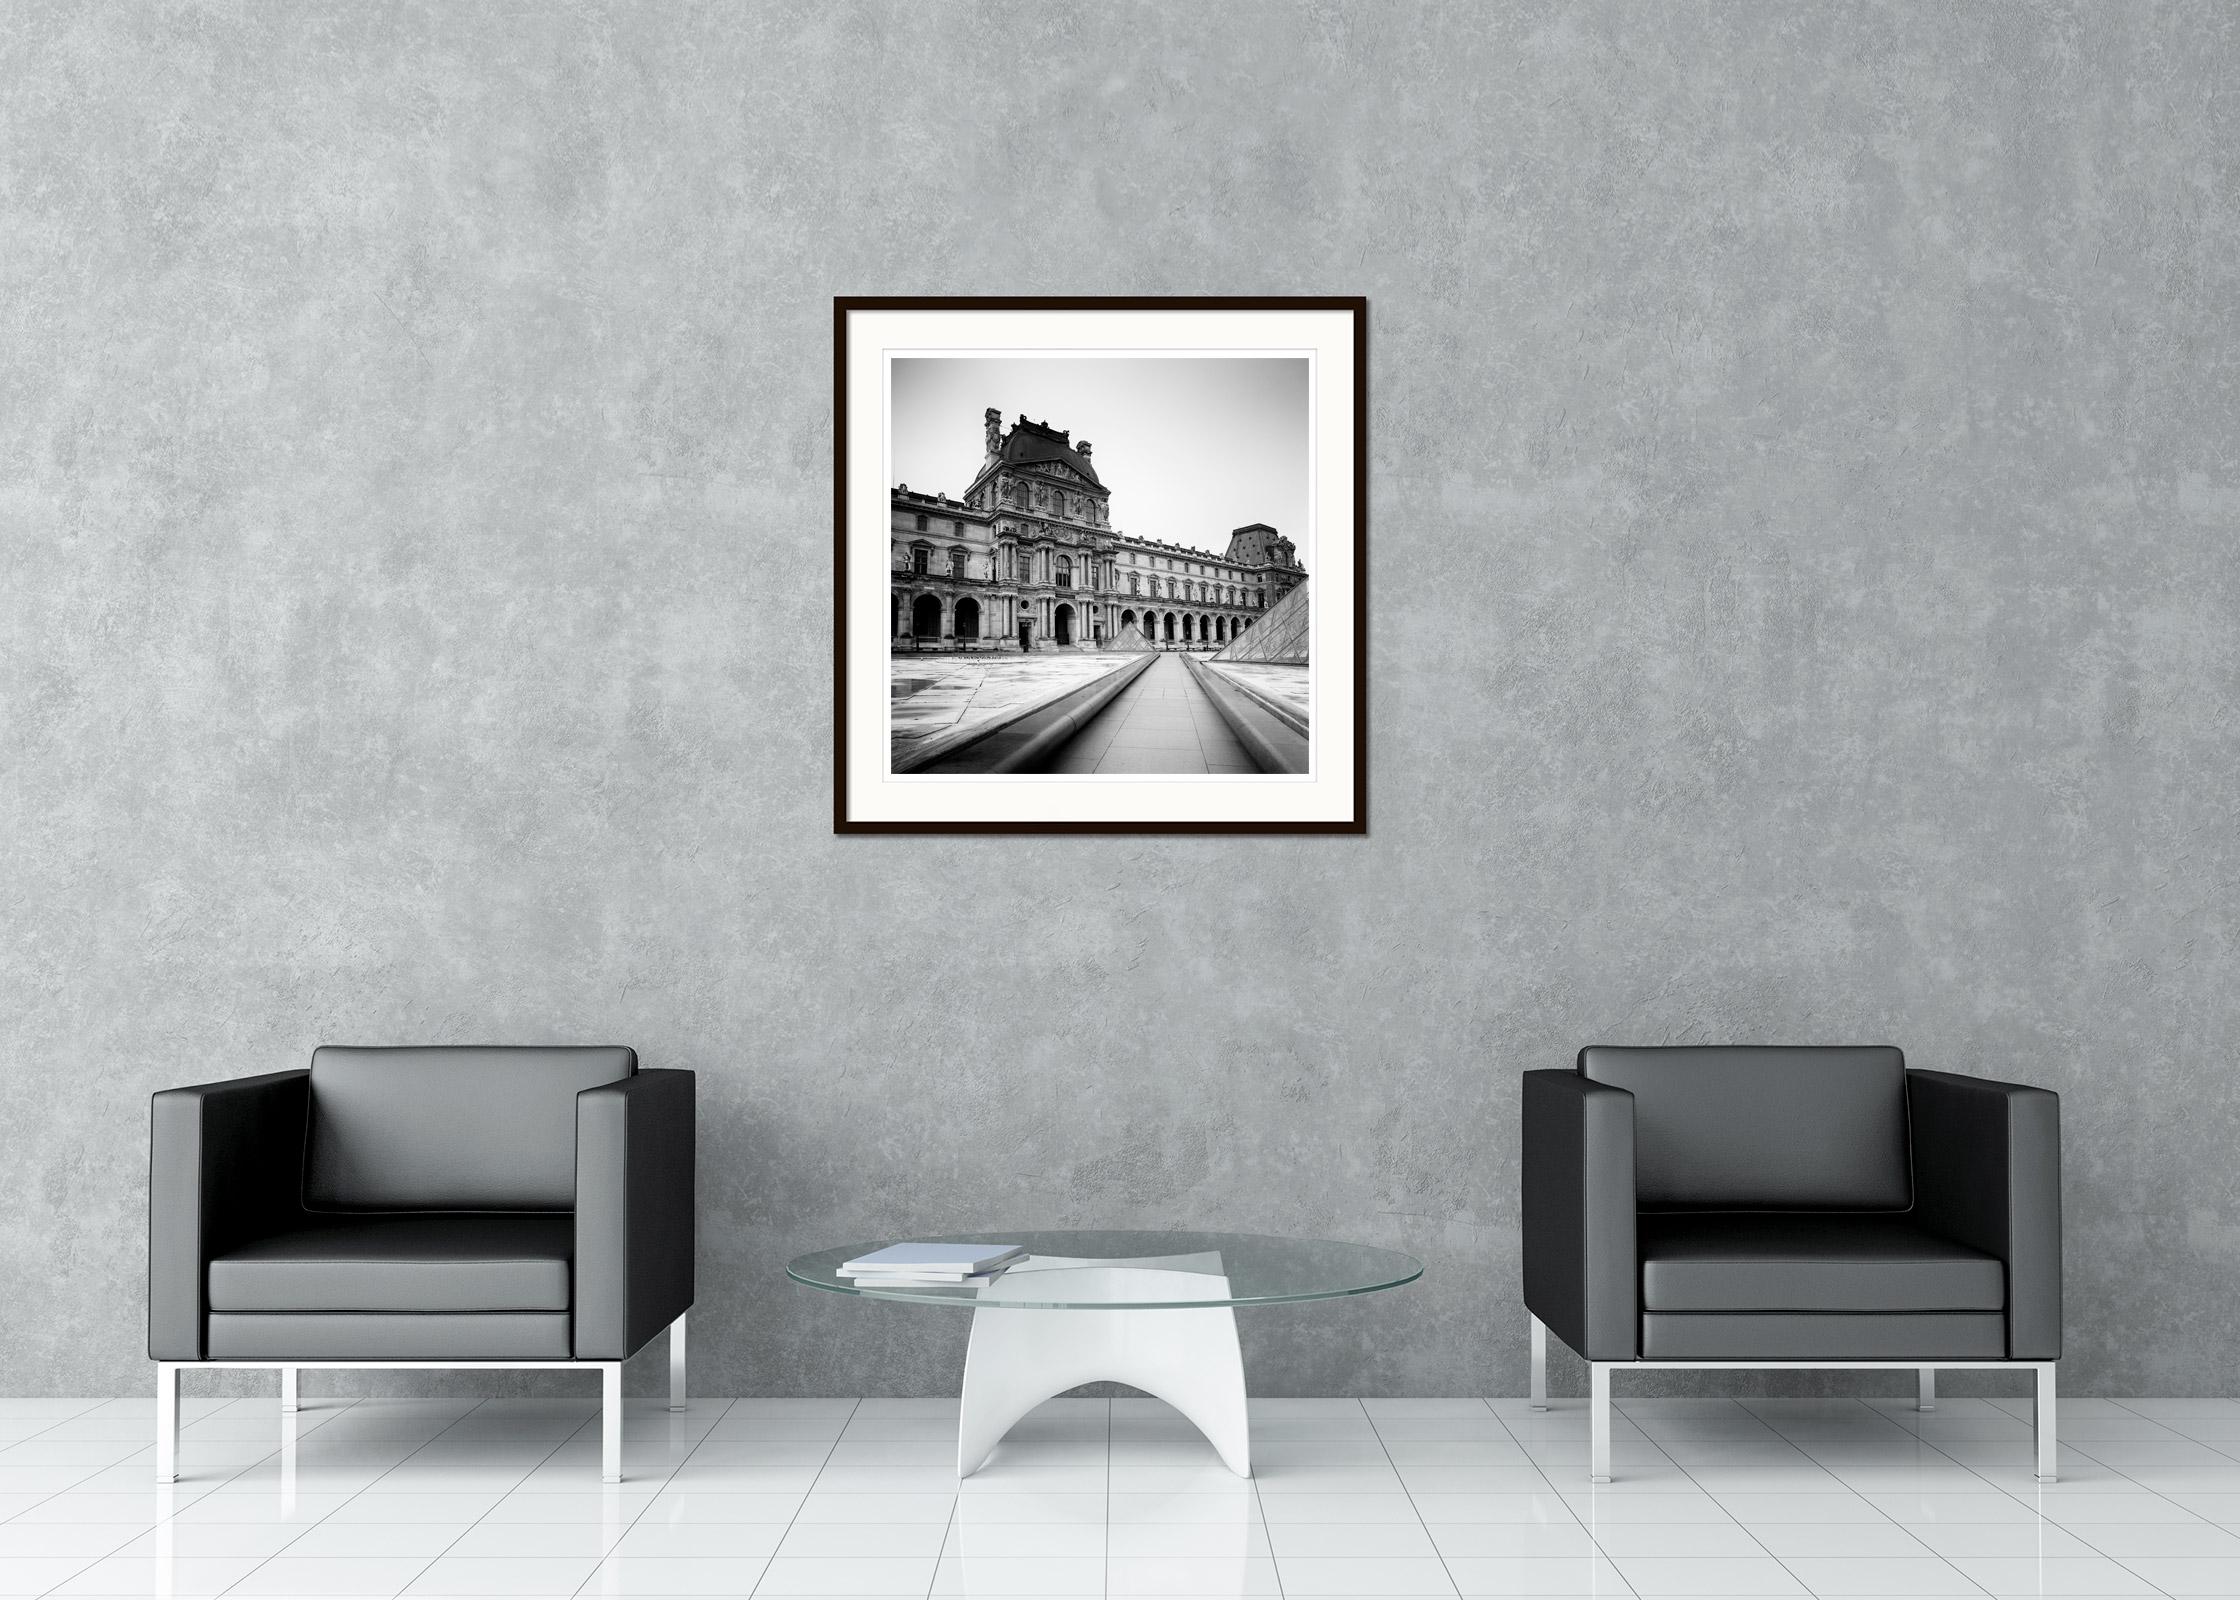 Black and White Fine Art Cityscape Photography - Analog print of the impressive architecture building Pavilion Denon Louvre in Paris, France. Archival pigment ink print, edition of 9. Signed, titled, dated and numbered by artist. Certificate of